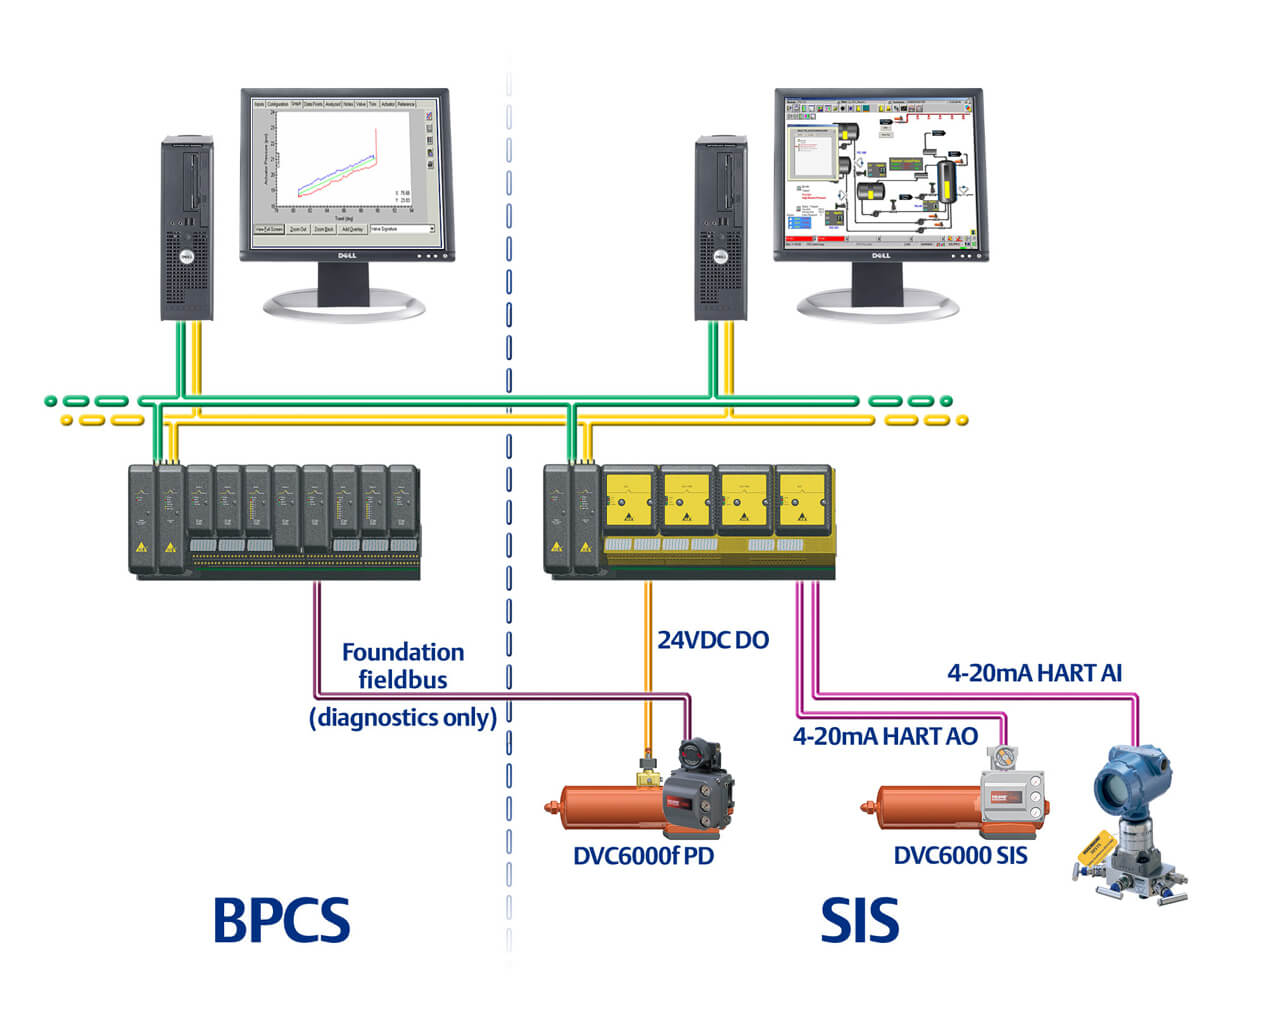 DeltaV and DeltaV SIS systems with DVC6000f PD and DVC6000 SIS